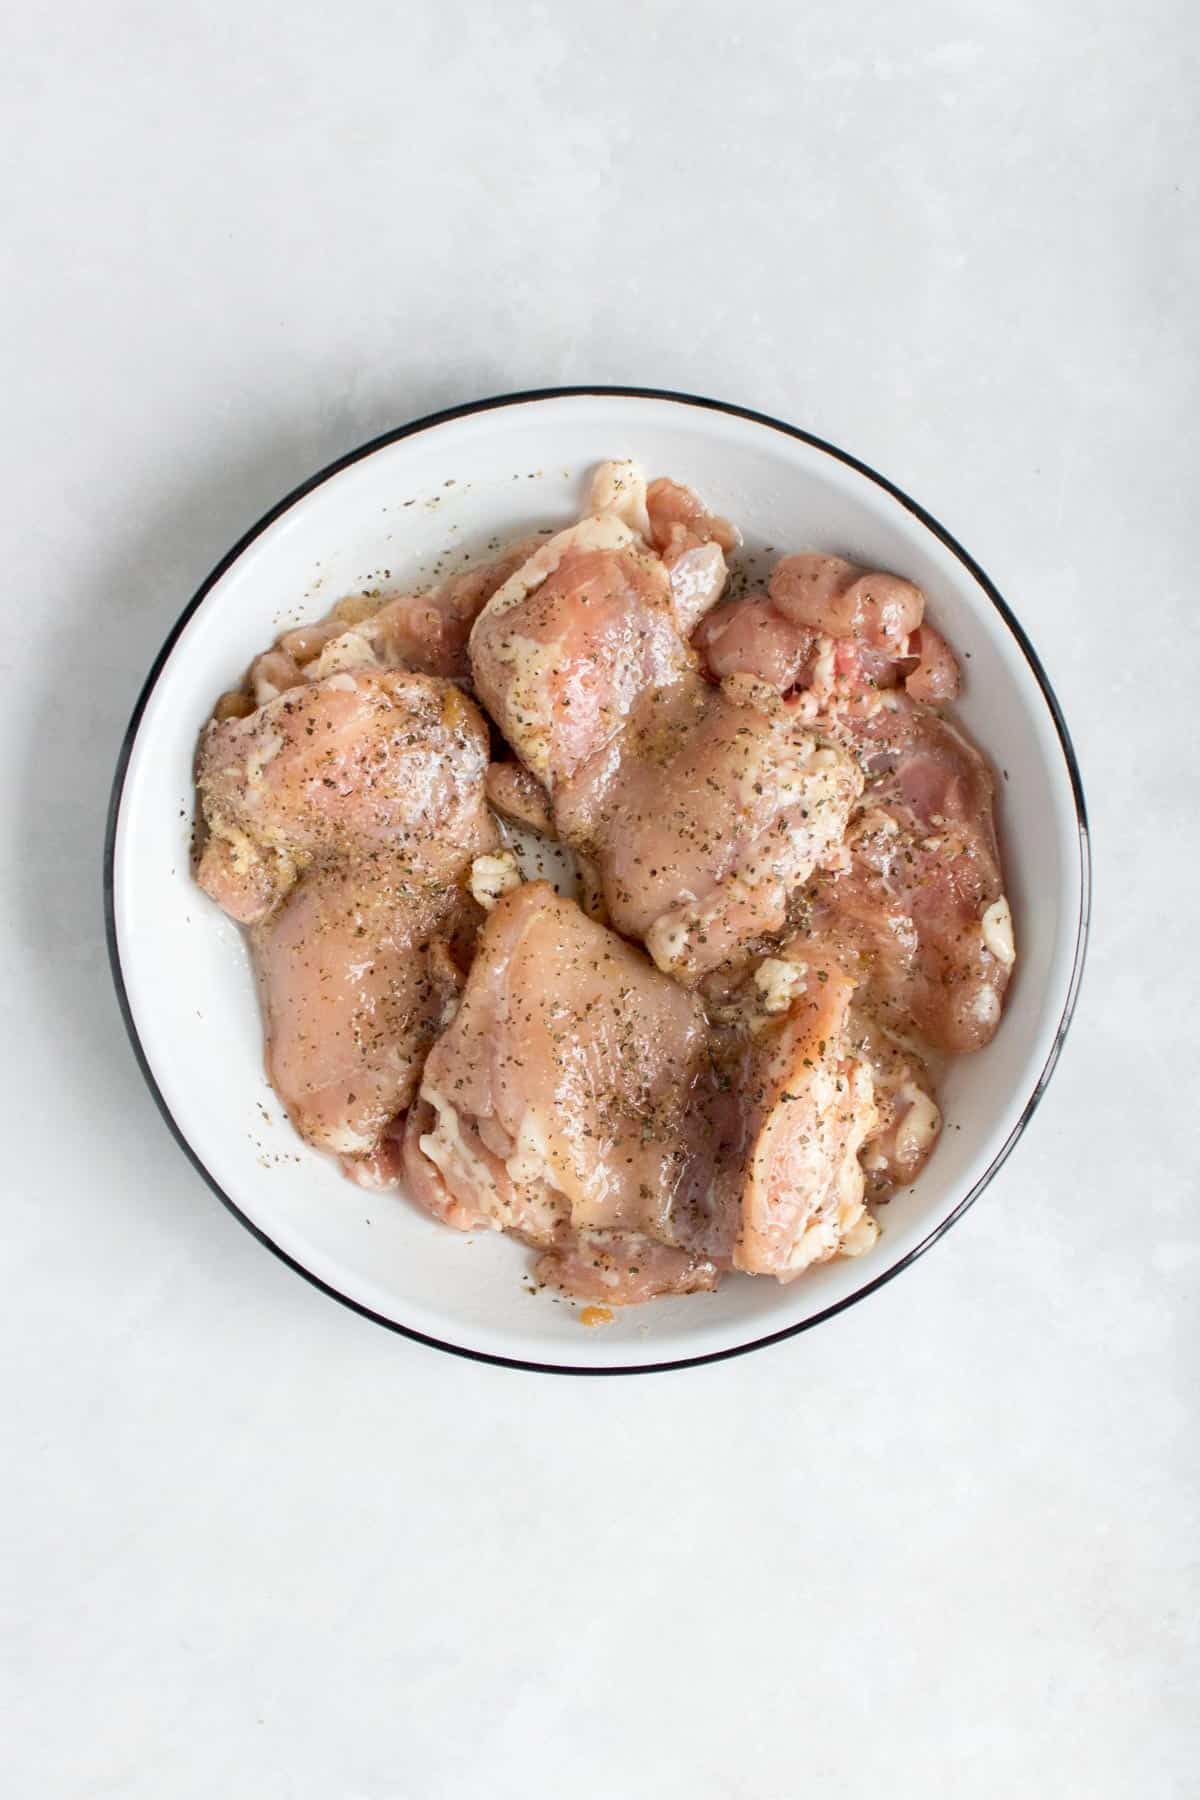 Chicken thighs, seasoned, in a plate.